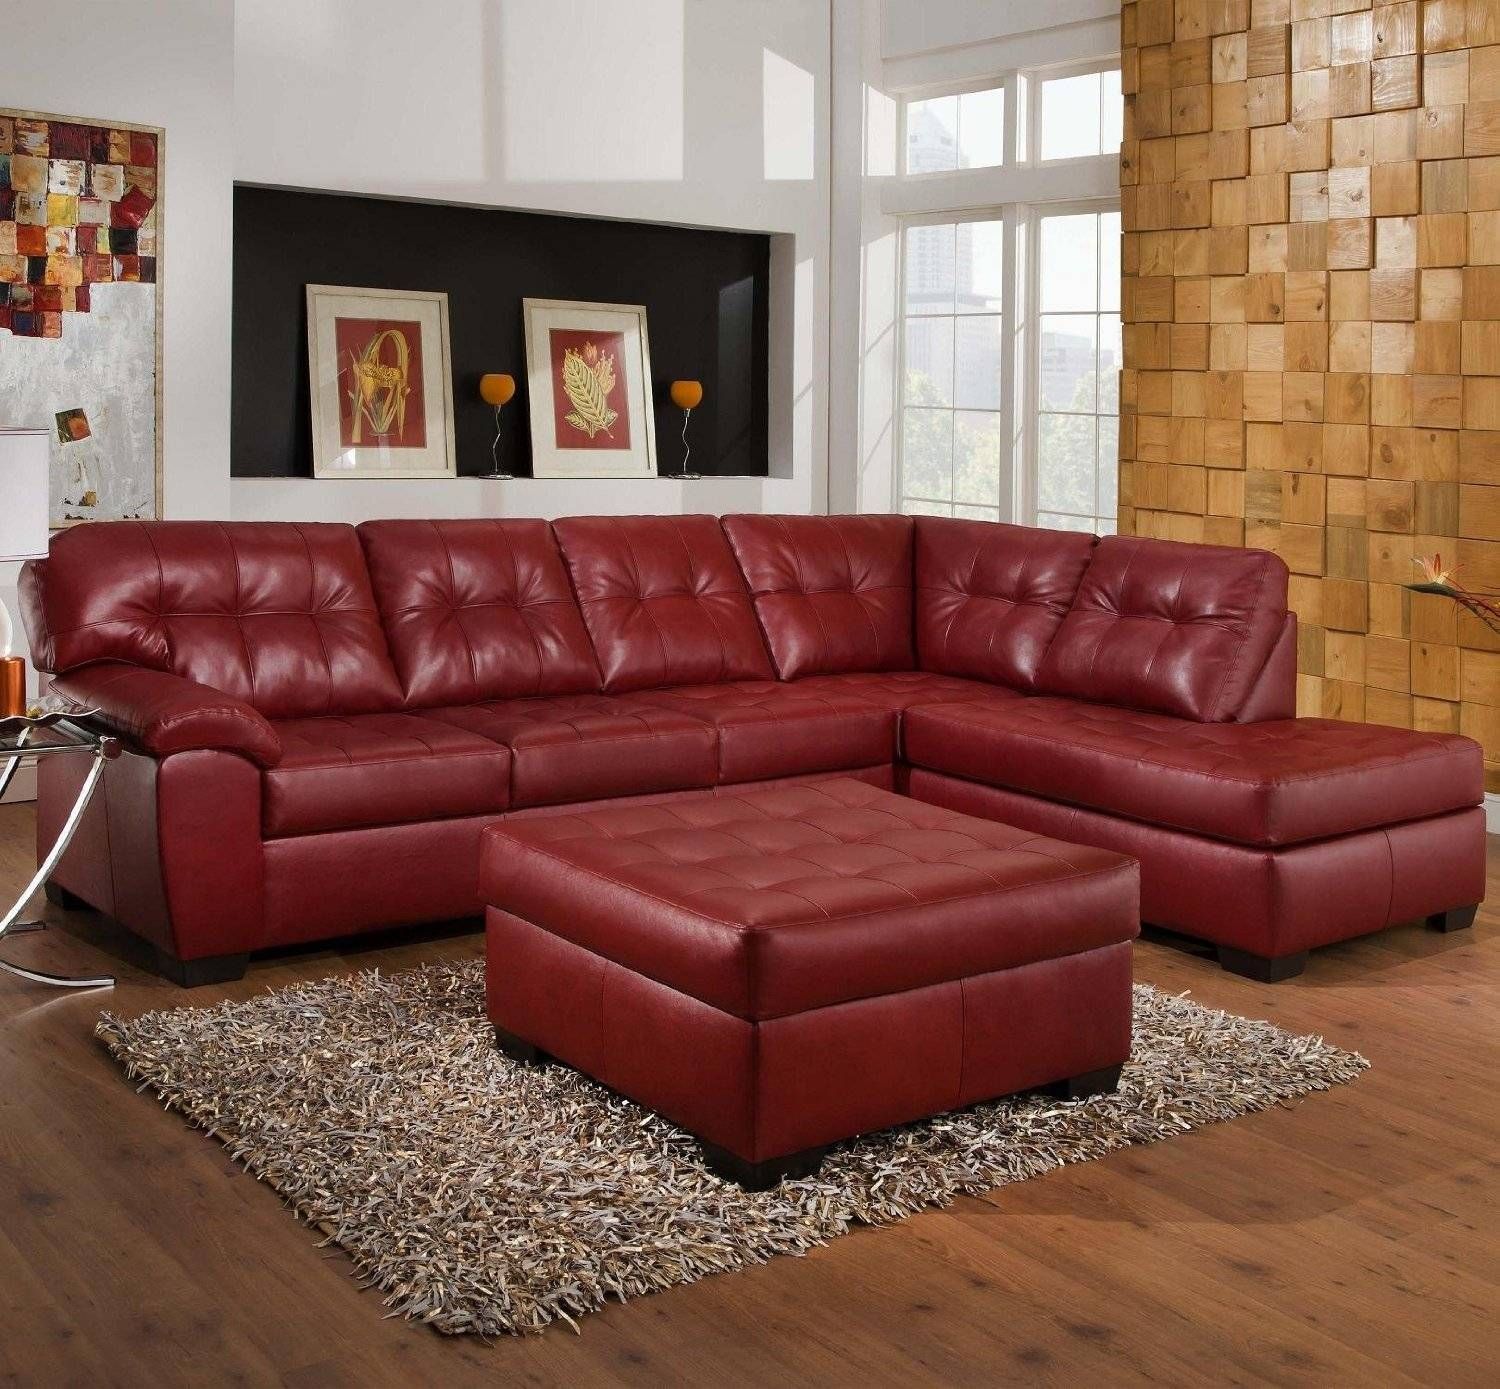 Ideas Red Leather Couches : Stylish Red Leather Couches – Home With Dark Red Leather Couches (View 2 of 15)